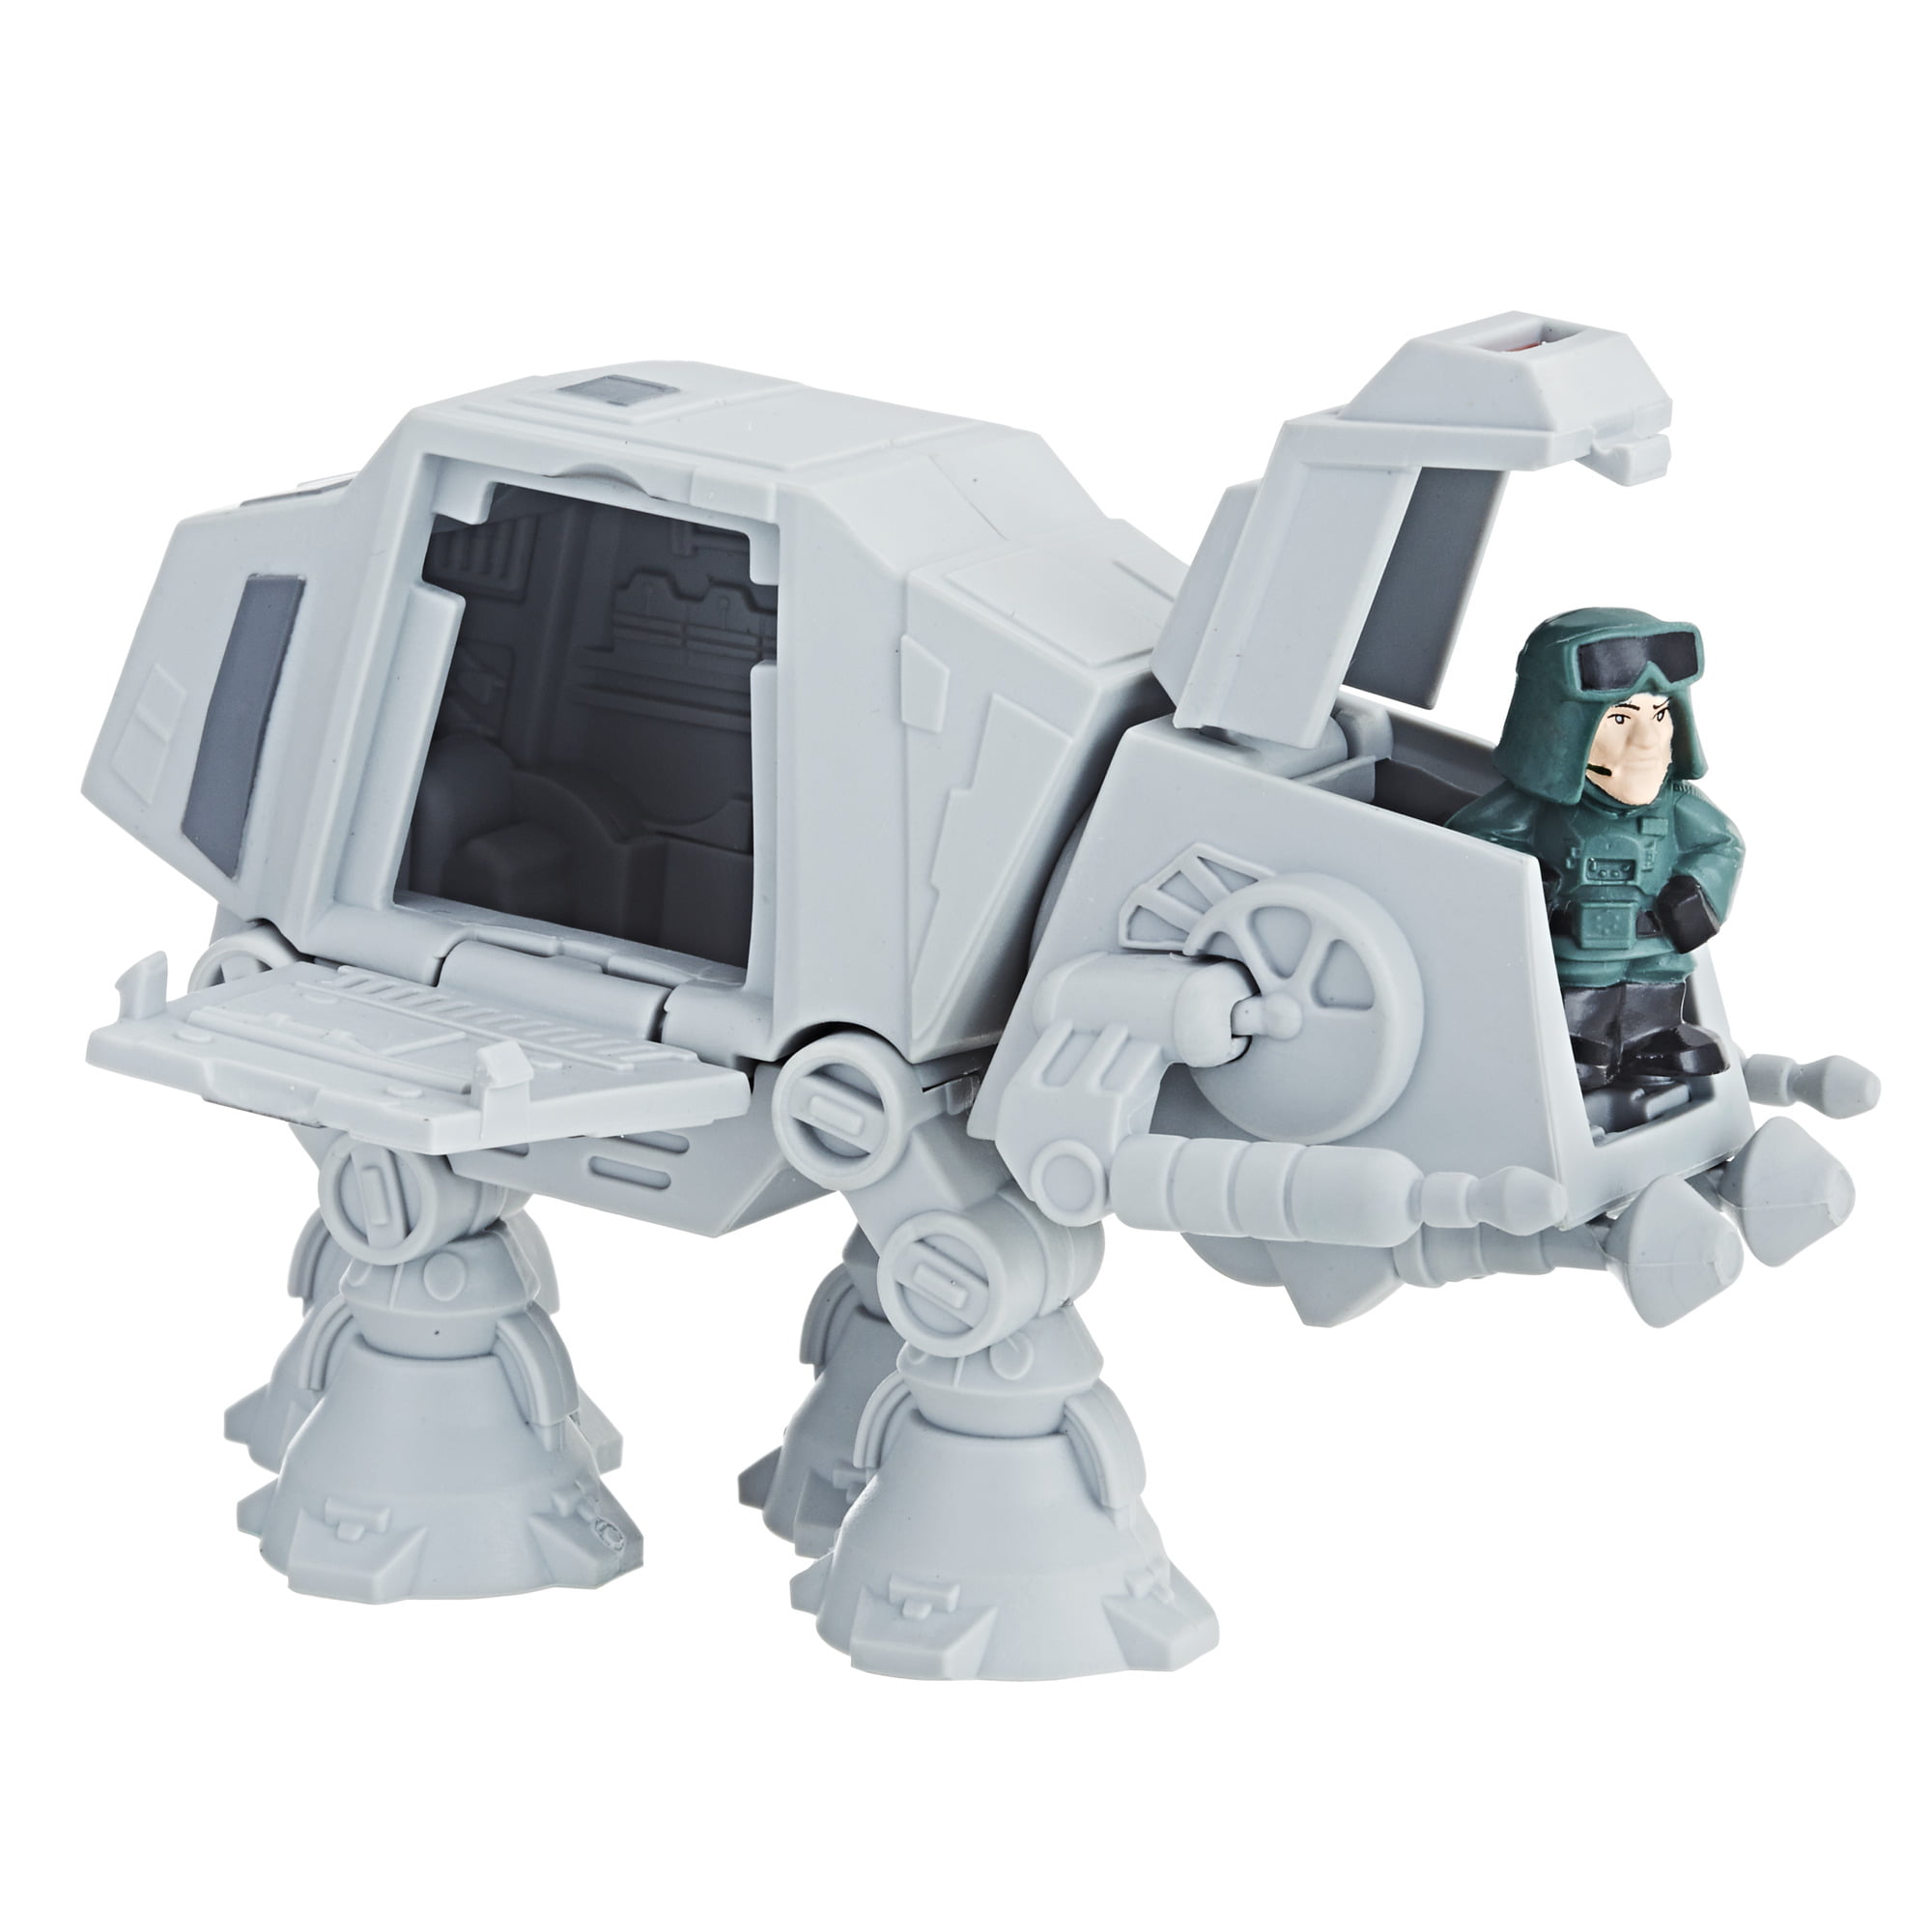 At-at Walker E2409 by Hasbro From 2017 for sale online Star Wars Micro Force